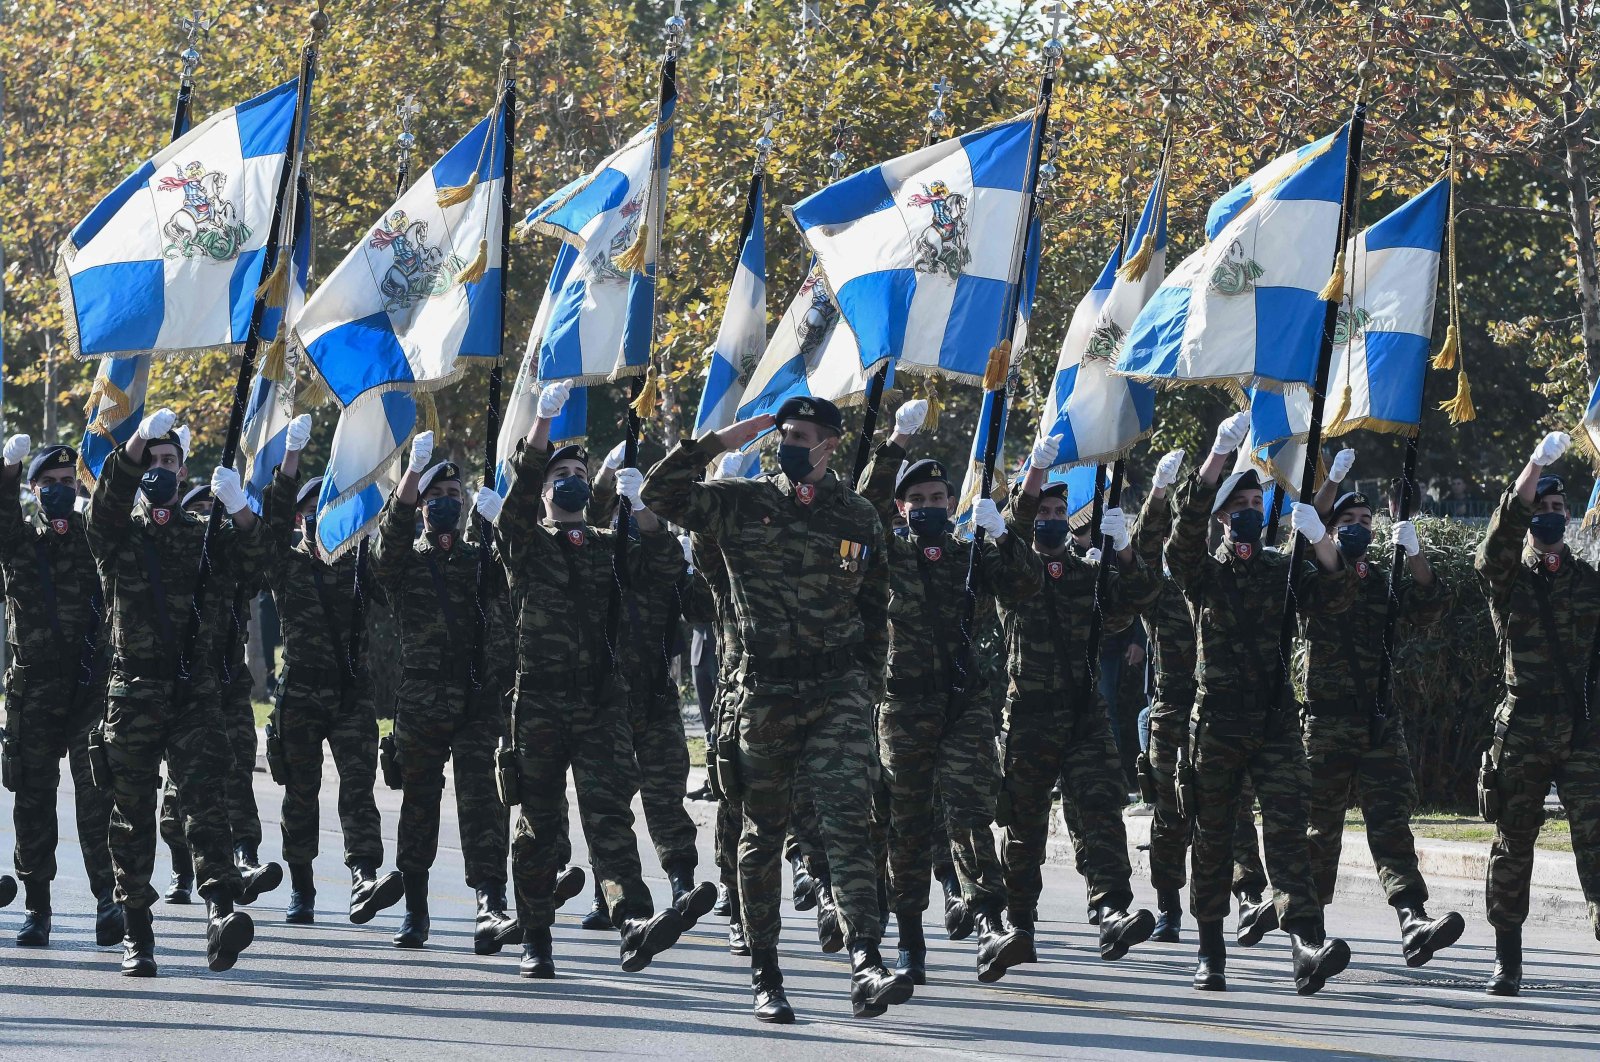 Greek soldiers hold flags as they attend a military parade during the celebrations marking Greece's National "Oxi" (No) Day, commemorating Greece's refusal to accept fascist Italy's ultimatum in 1940 during World War II, Thessaloniki, Greece, Oct. 28, 2021. (AFP Photo)